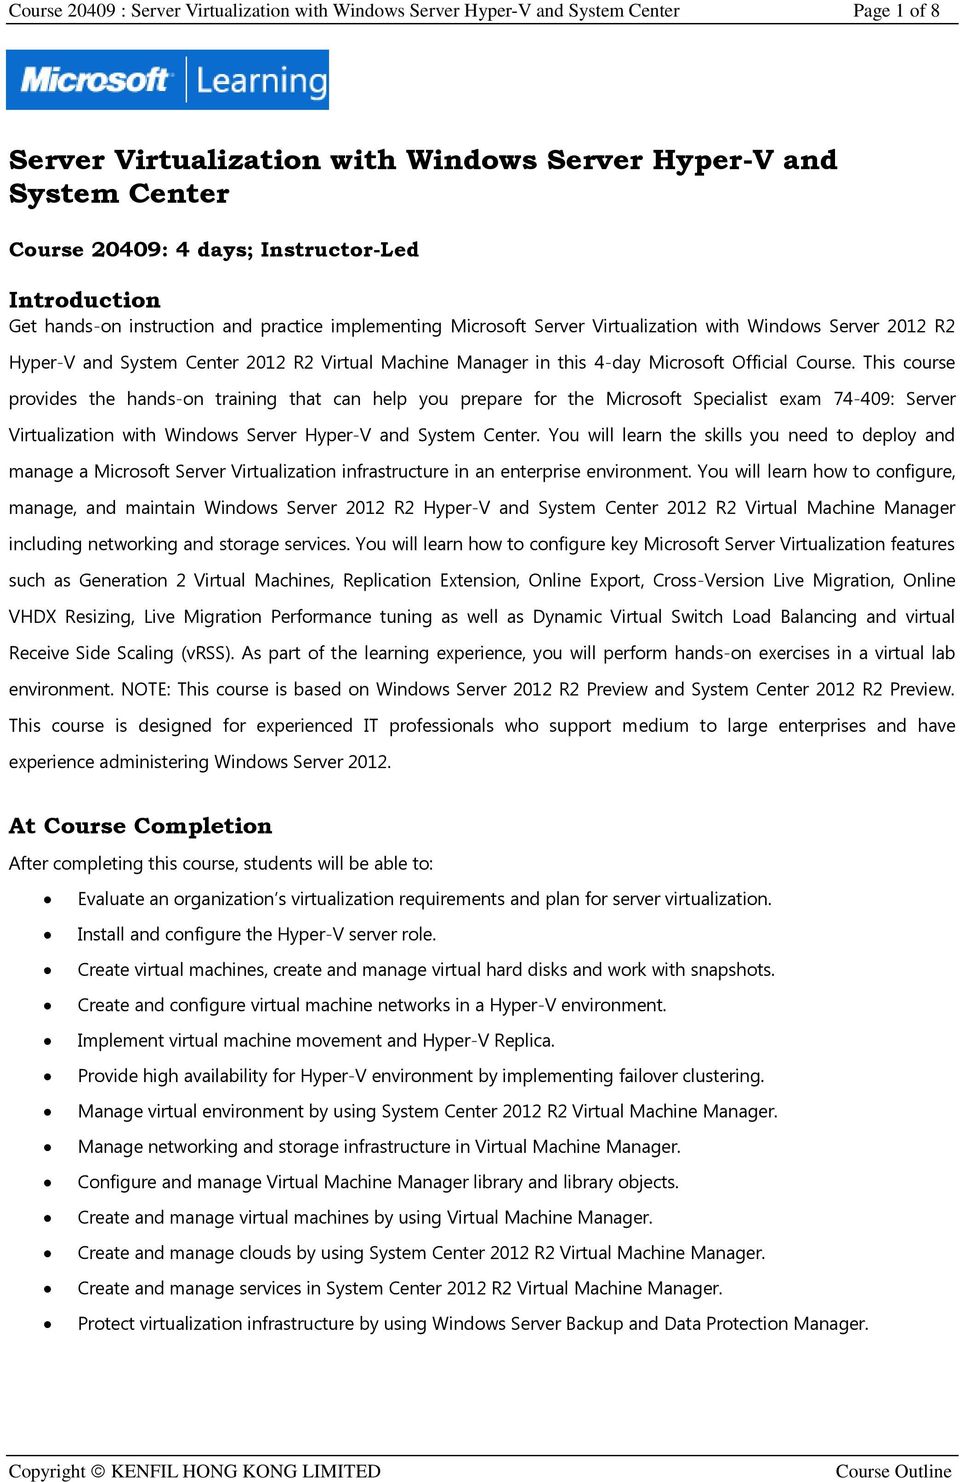 Microsoft Official Course.